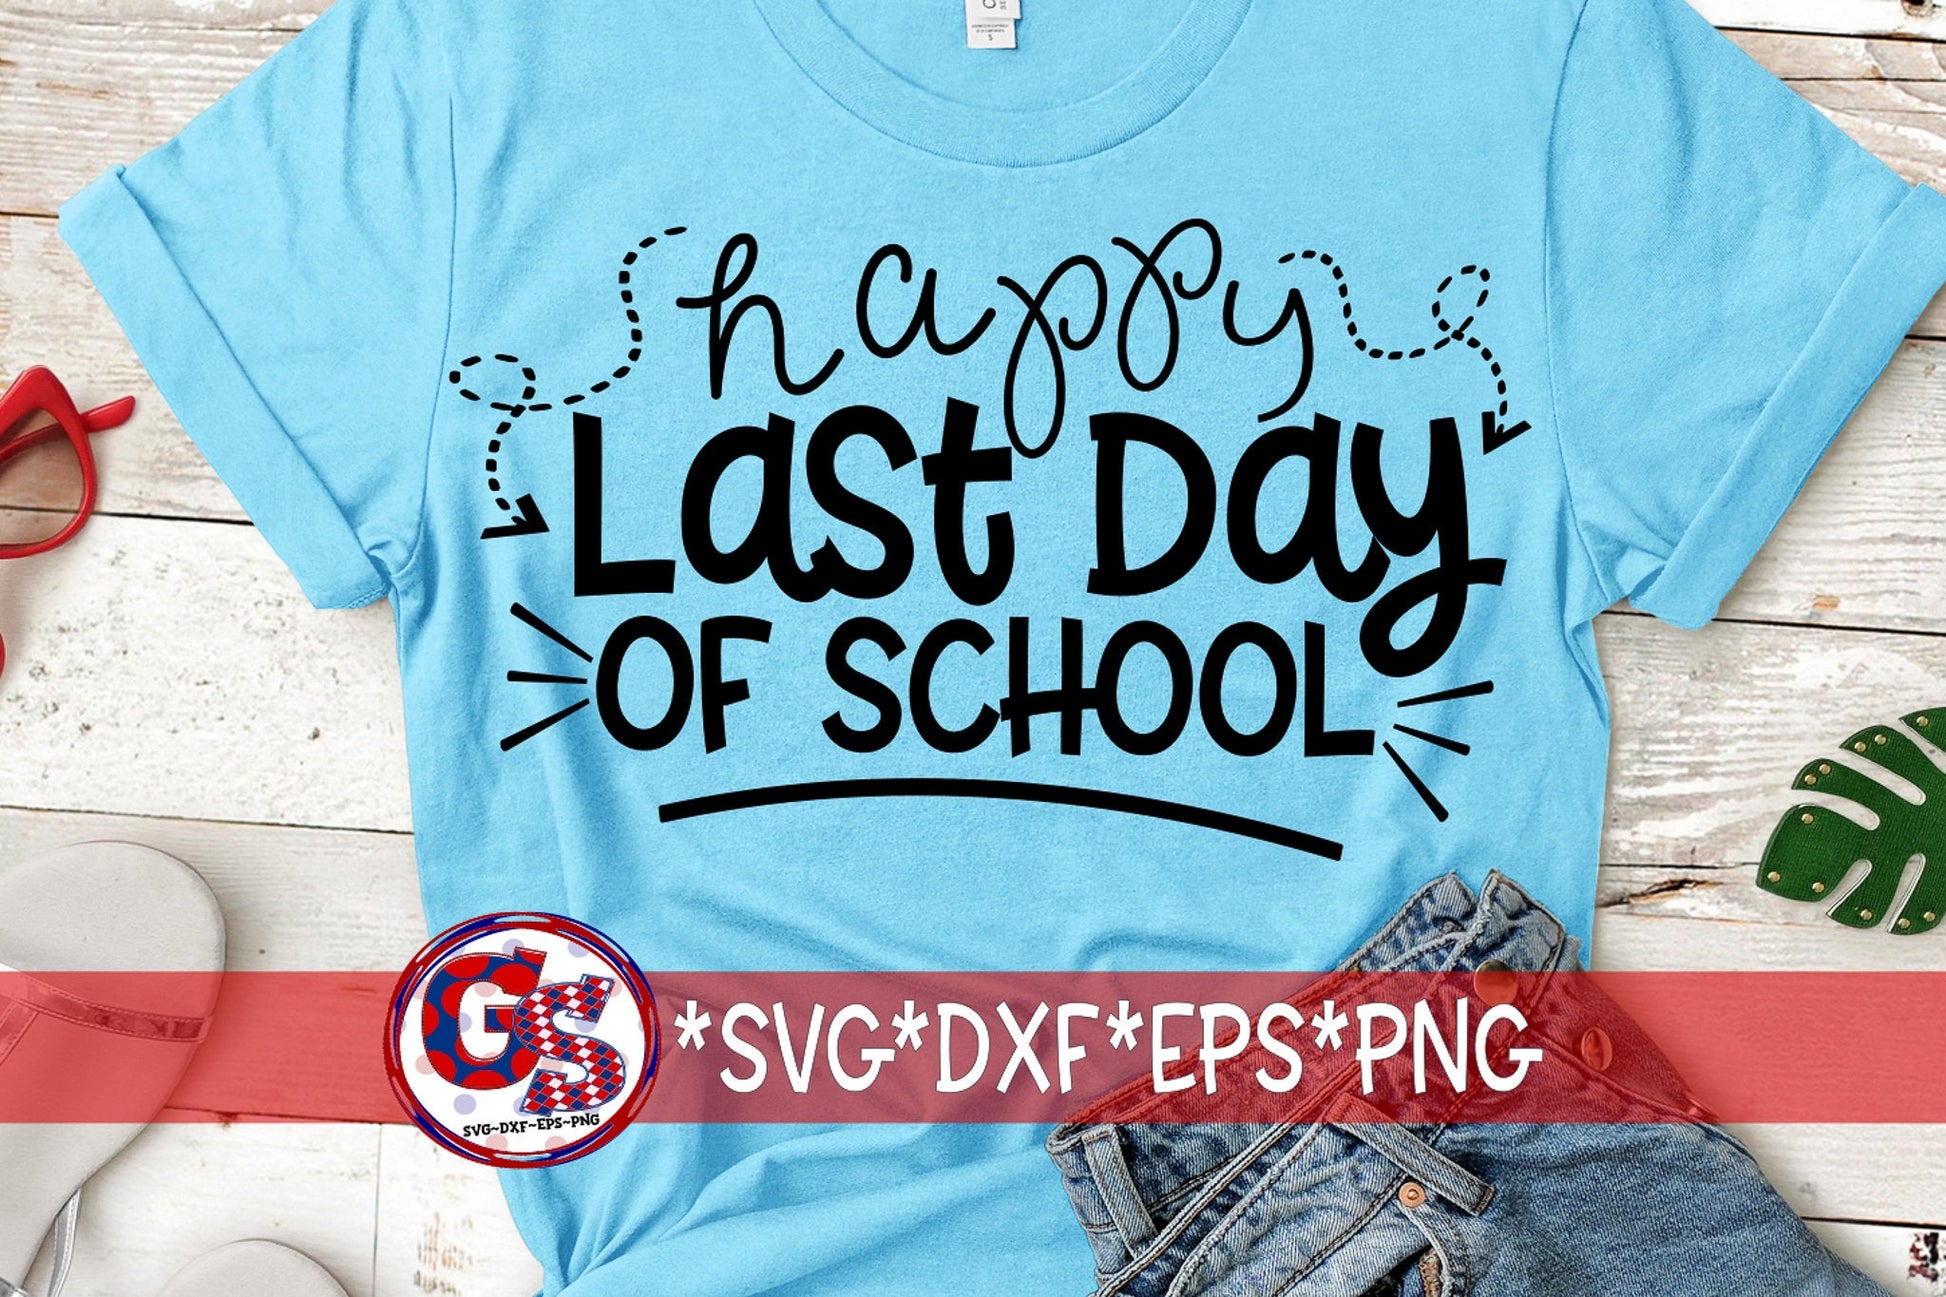 Happy Last Day Of School svg dxf eps png. Happy Last Day SvG | Last Day Of School SvG | Last Days SvG | School | Instant Download Cut File